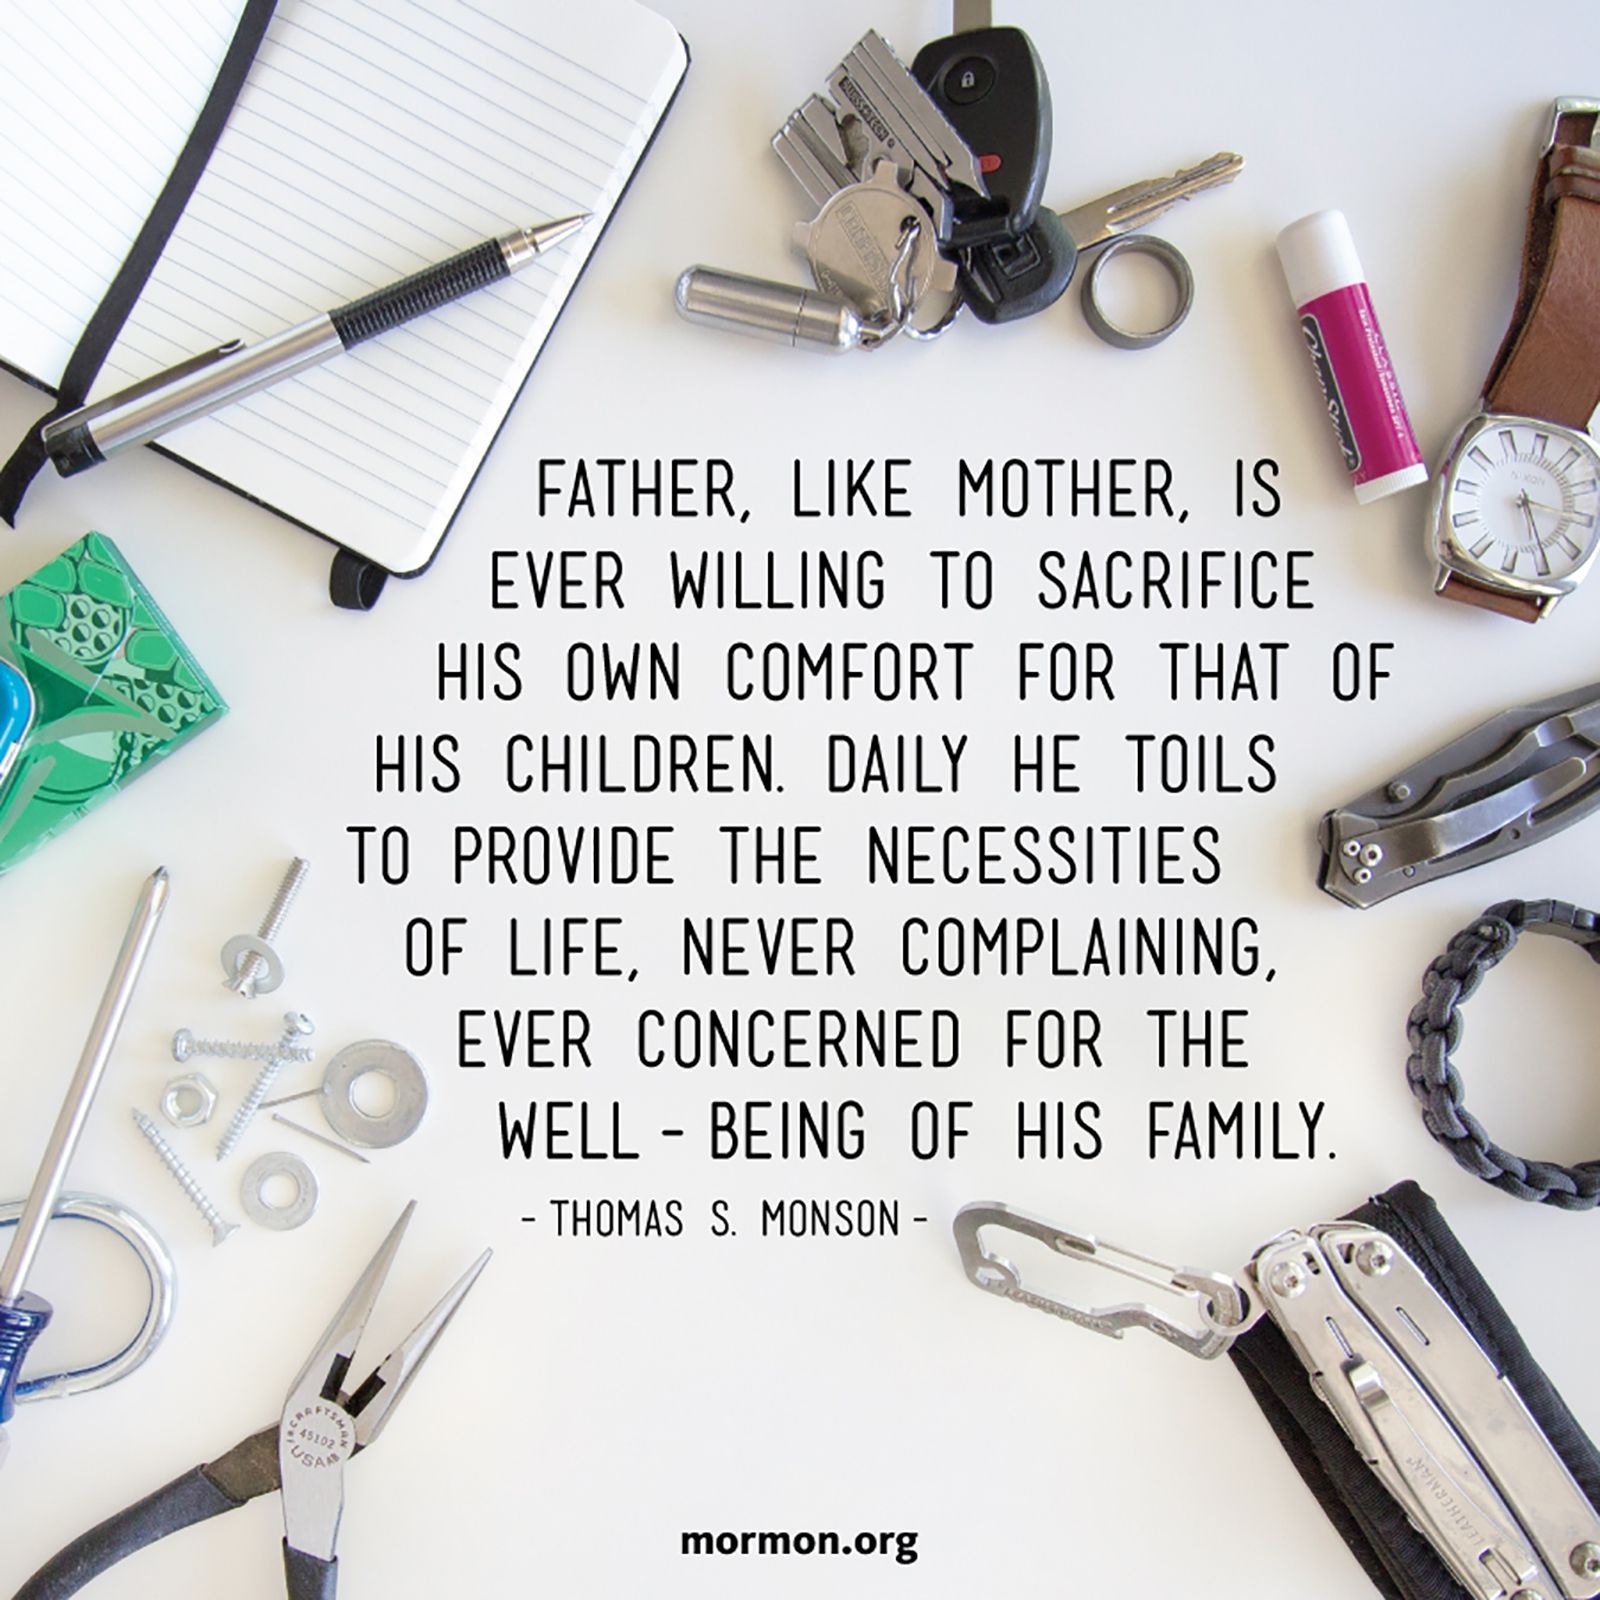 “Father, like Mother, is ever willing to sacrifice his own comfort for that of his children. Daily he toils to provide the necessities of life, never complaining, ever concerned for the well-being of his family.”—President Thomas S. Monson, “An Attitude of Gratitude”